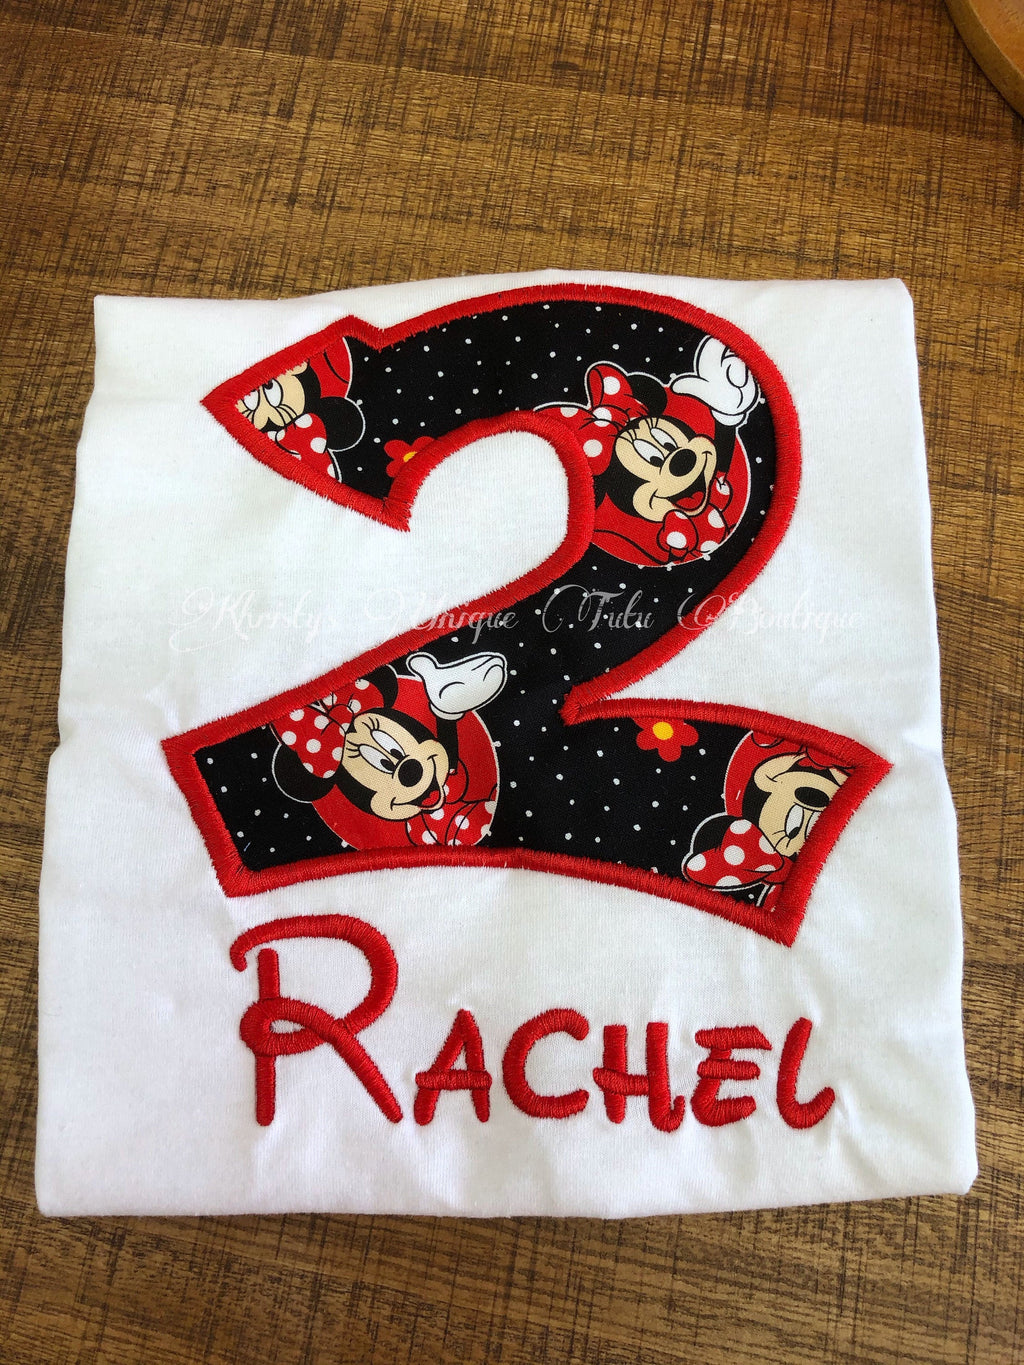 Minnie Mouse Birthday Shirt, Red and Black minnie shirt,1st 2nd Birthday shirt,custom embroidered birthday shirt